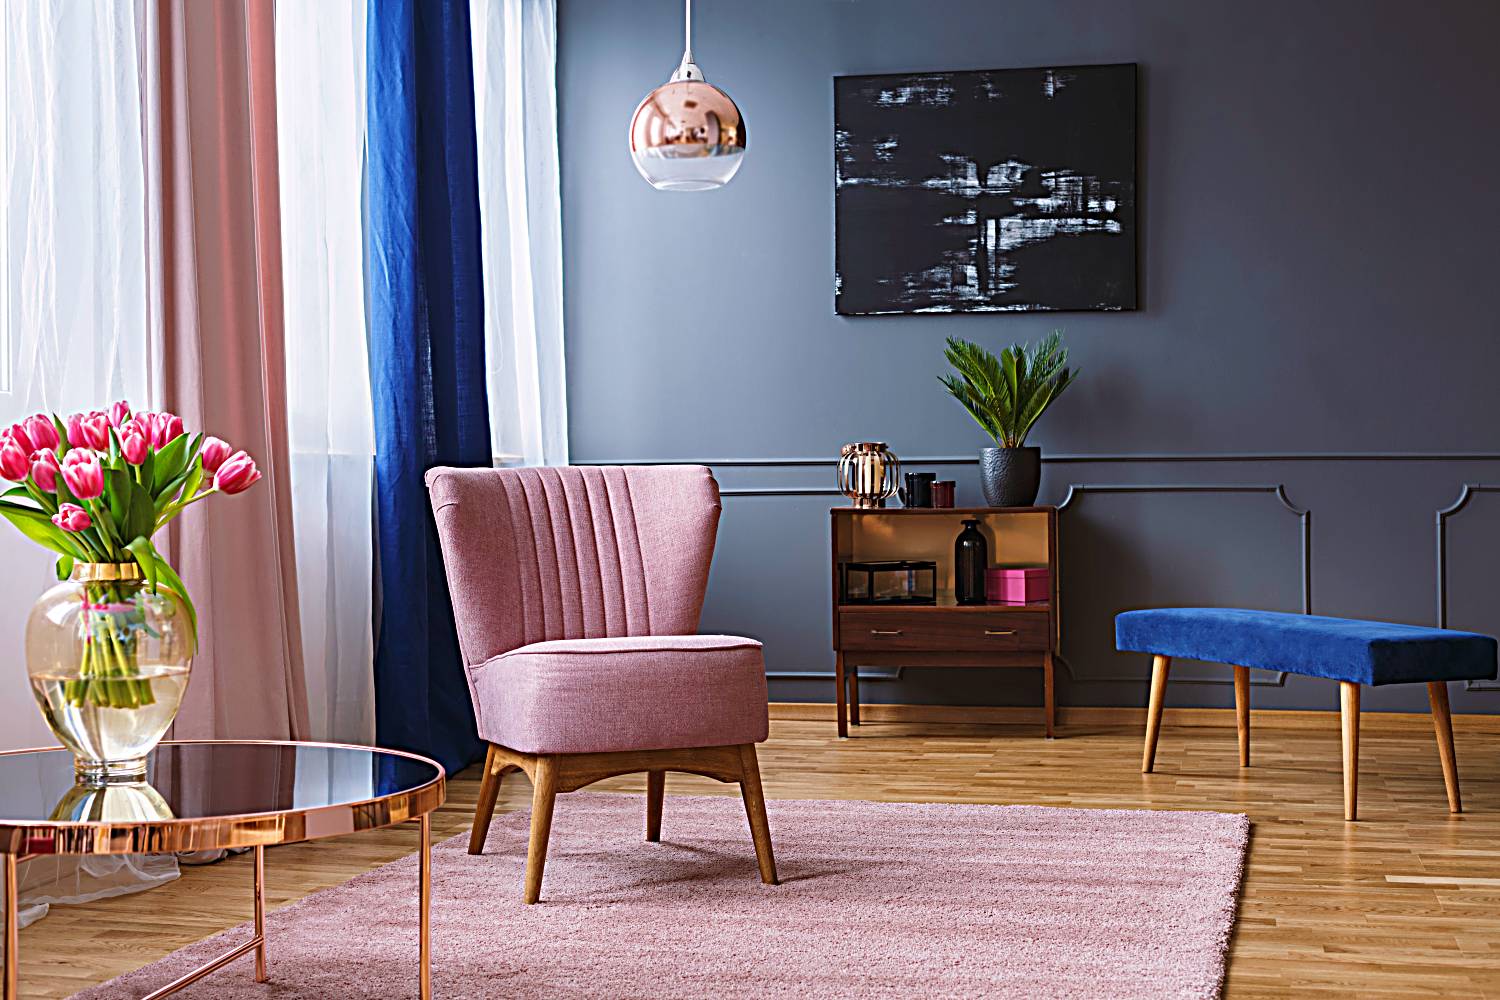 pink armchair standing on a rug and under a lamp in spacious living room interior, next to a table with flowers and in front of a shelf next to a grey wall with dark painting